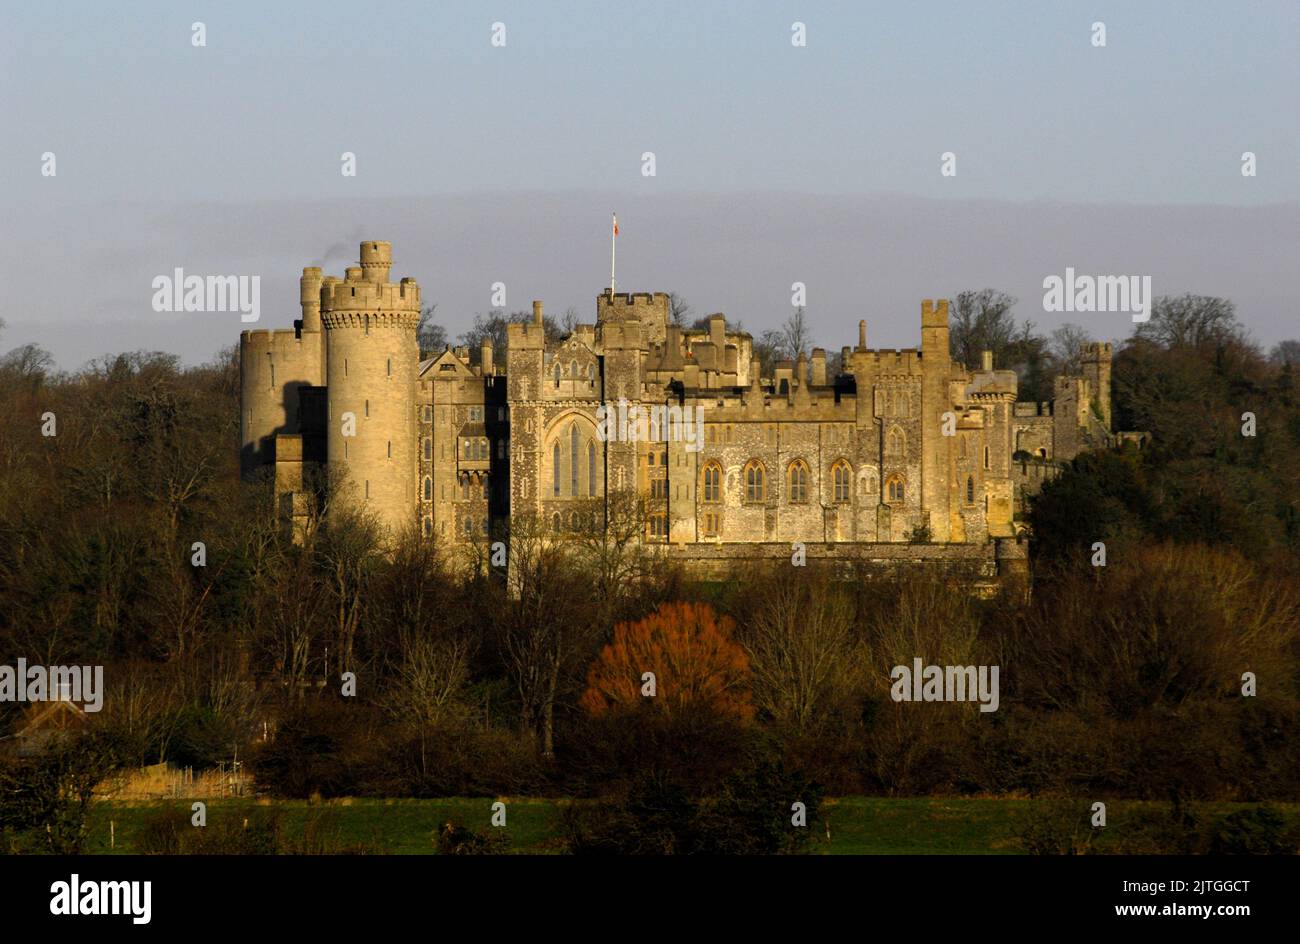 AJAXNETPHOTO. ARUNDEL, ENGLAND. - FAMED CASTLE - ARUNDEL CASTLE, WEST SUSSEX, SEAT OF THE DUKE OF NORFOLK, OVERLOOKS THE RIVER ARUN. BUILT AT THE END OF THE 11TH CENTURY BY ROGER DE MONTGOMERY, EARL OF ARUNDEL.PHOTO: JONATHAN EASTLAND REF:D142202 4032 Stock Photo